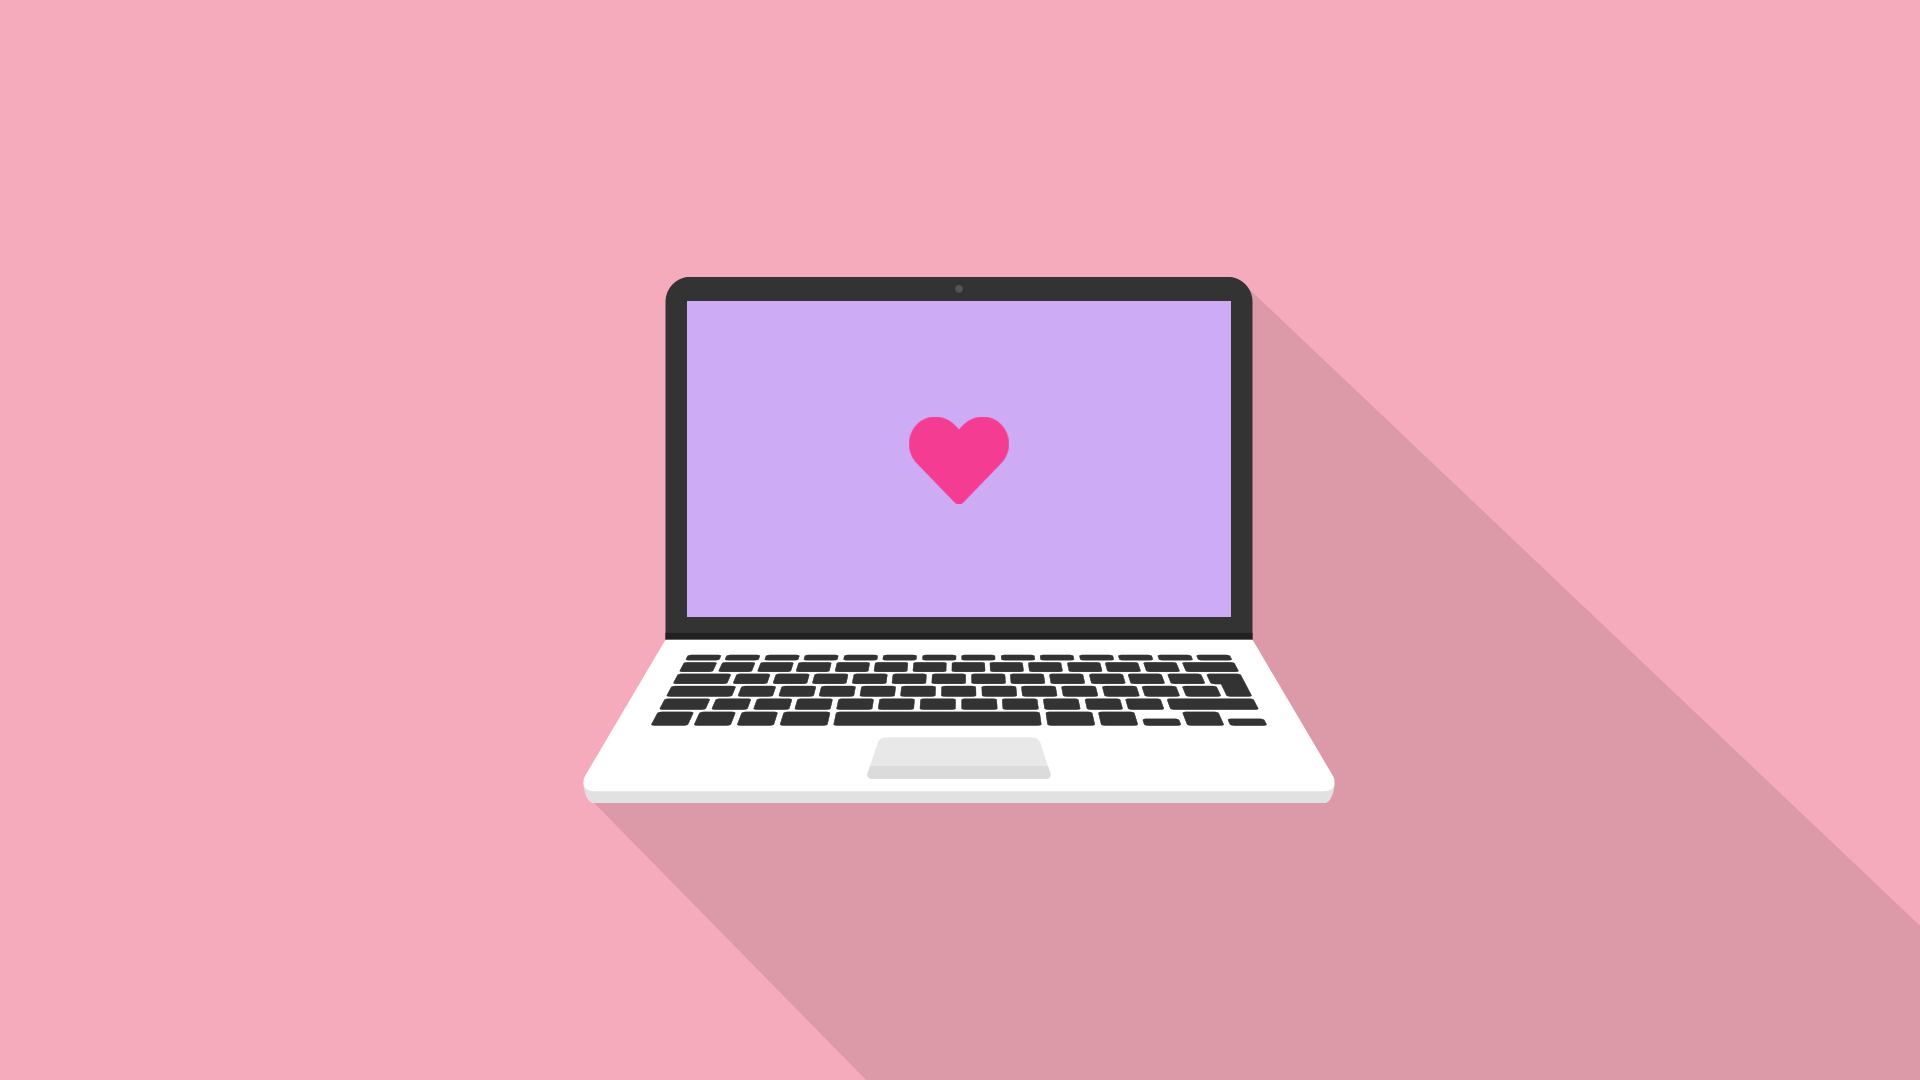 A pink heart gif zooming in and out of a laptop screen